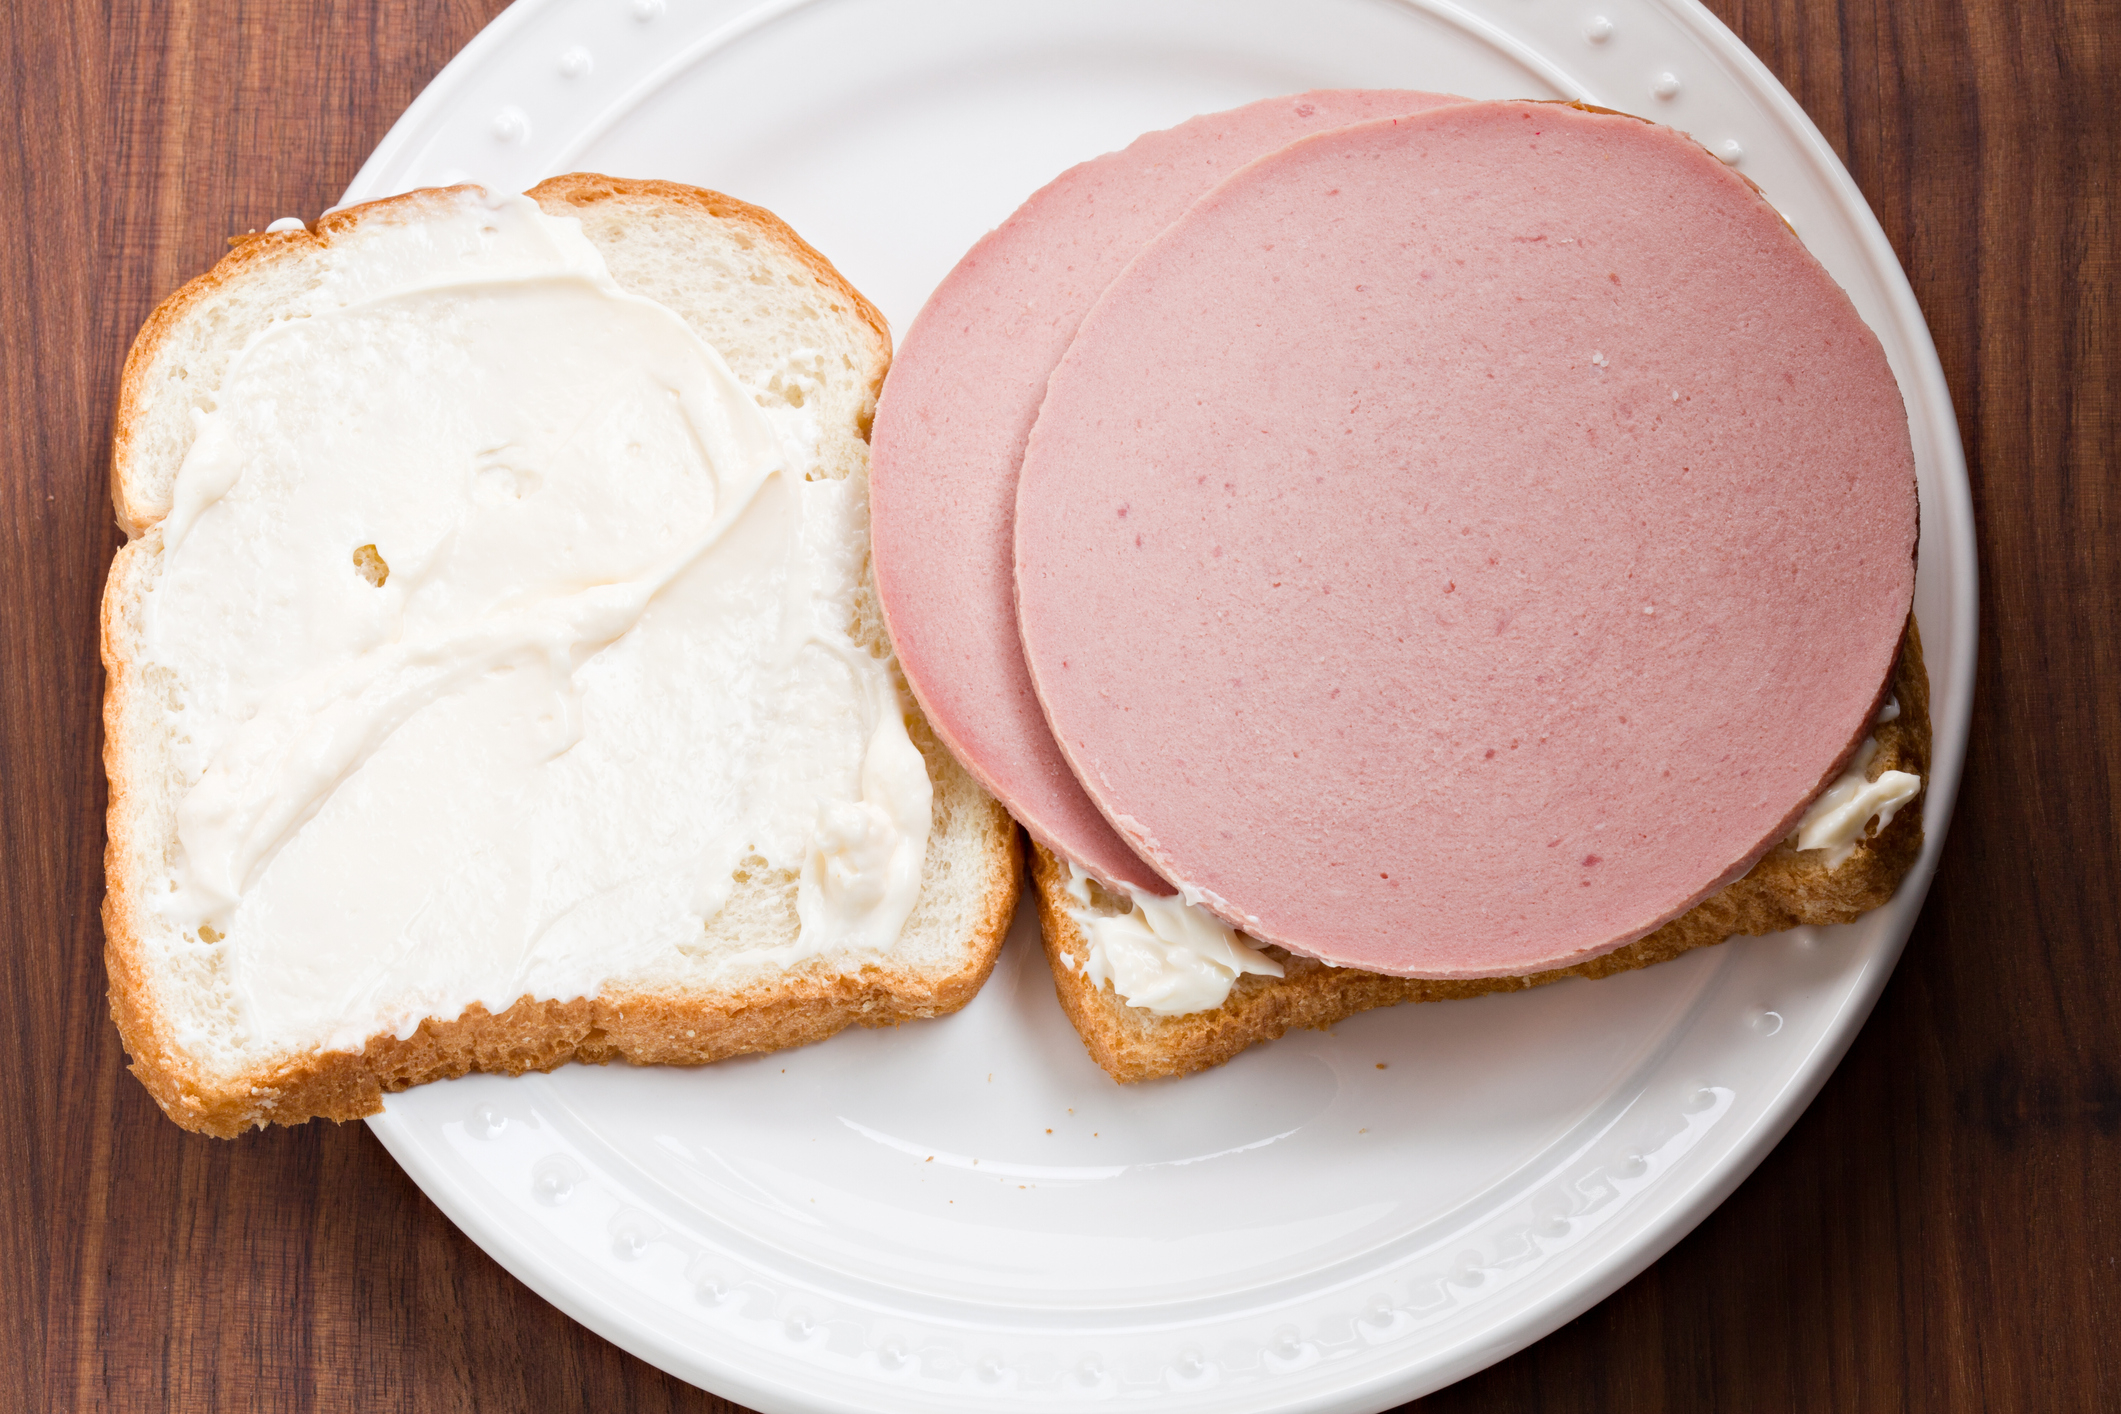 An overhead close up view of a dinner plate with an open face bologna sandwich on white sourdough bread